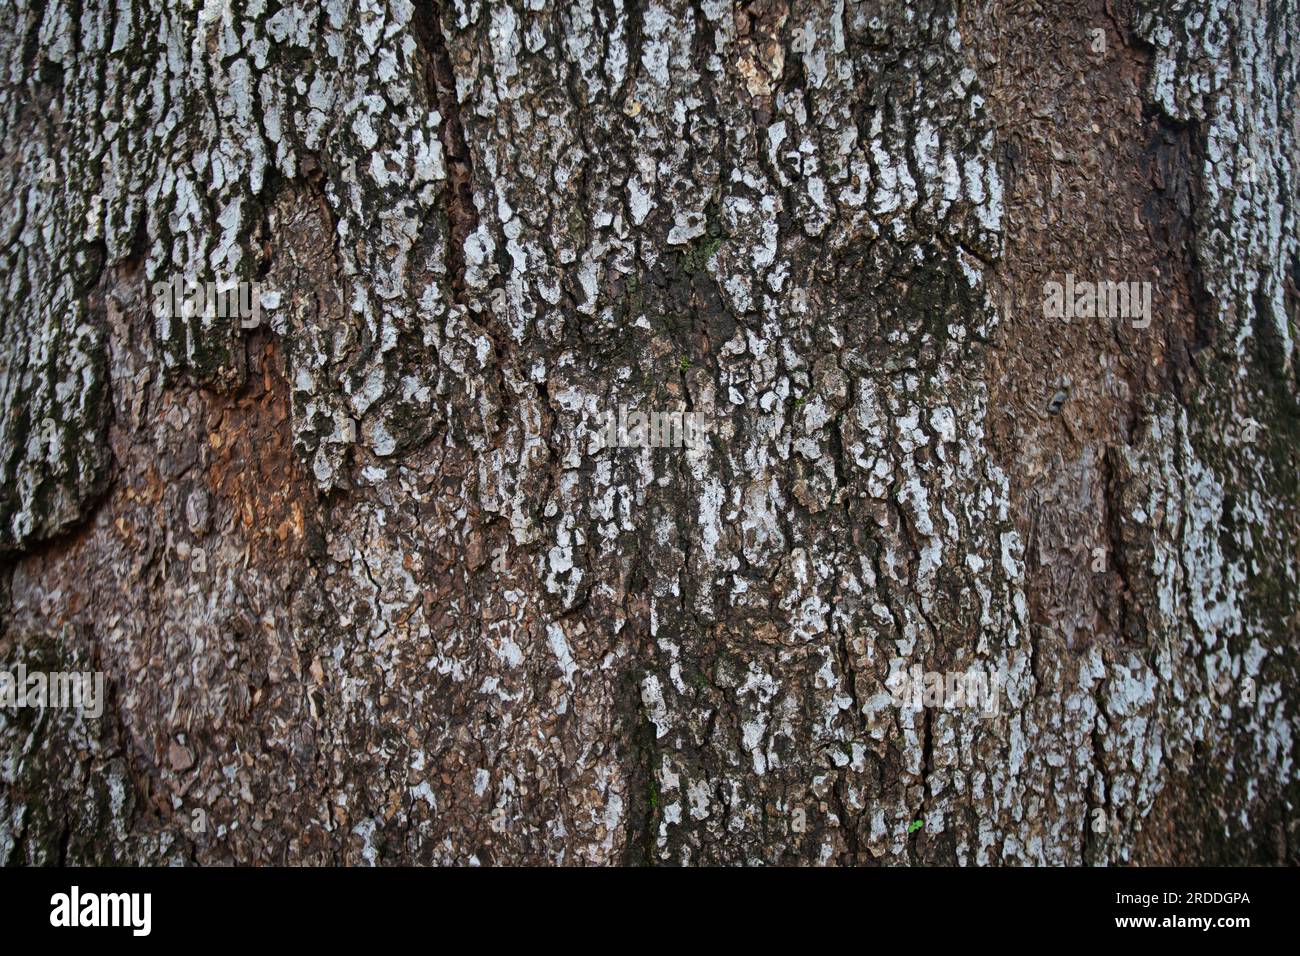 The brown bark texture represents old age. Stock Photo